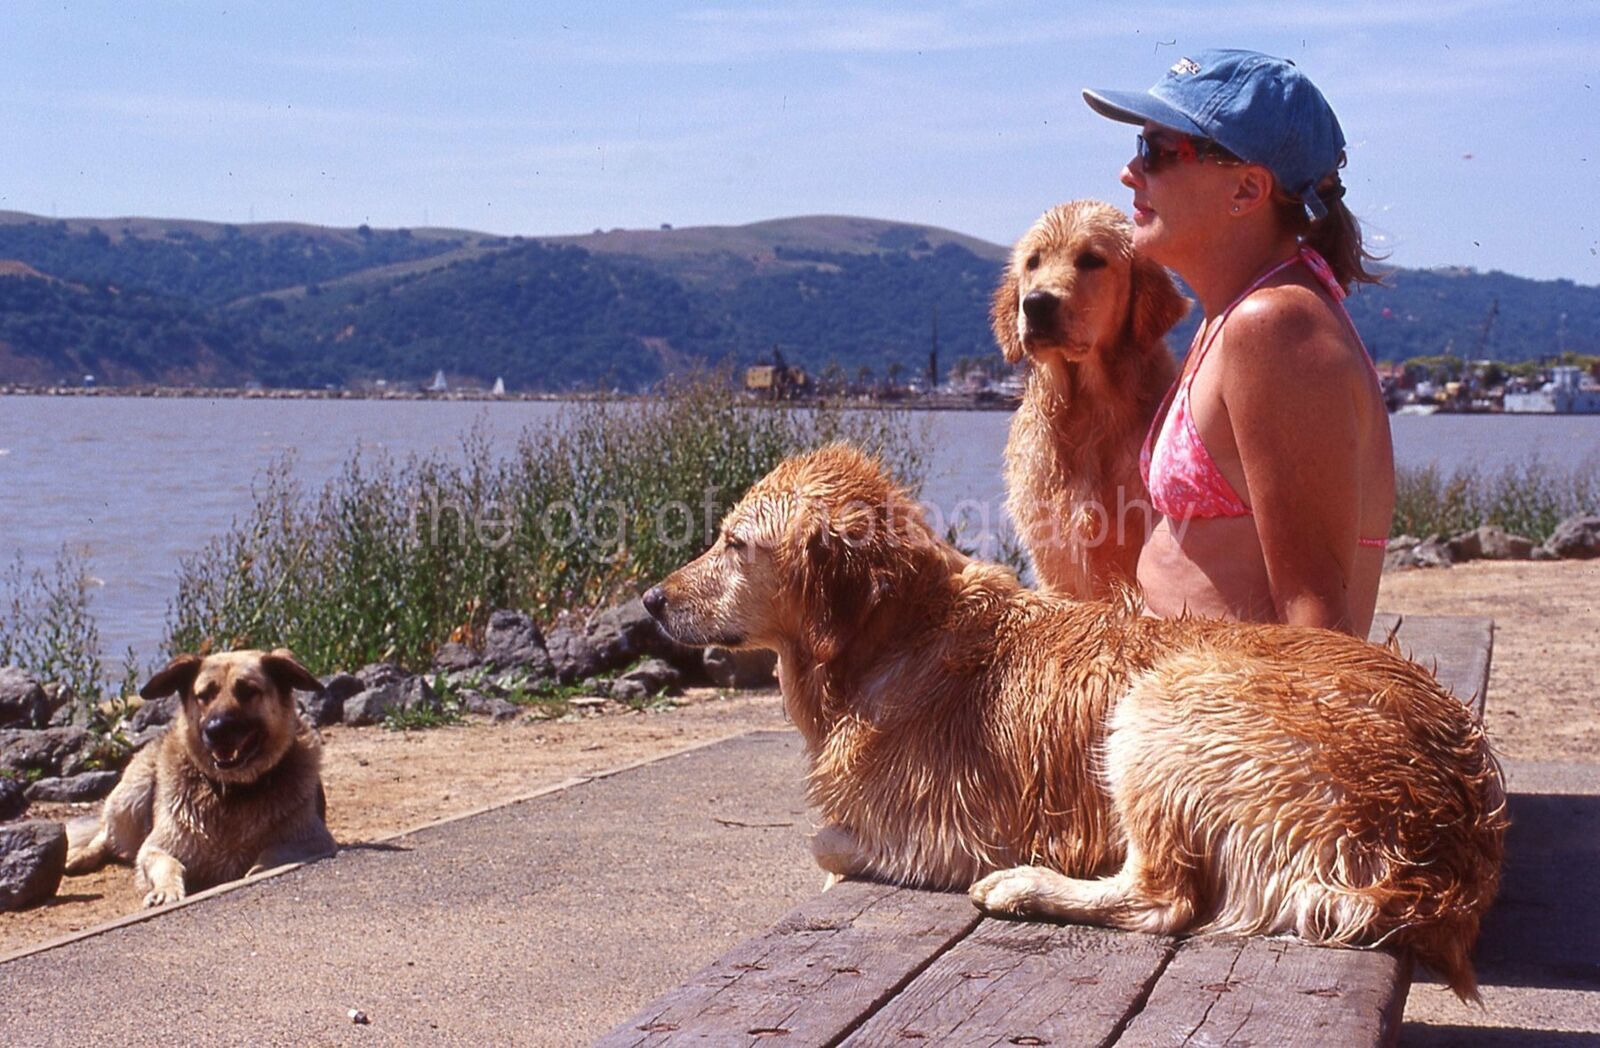 DOG GIRL At Water's Edge VINTAGE 35mm FOUND SLIDE Transparency Photo Poster painting 09 T 5 E